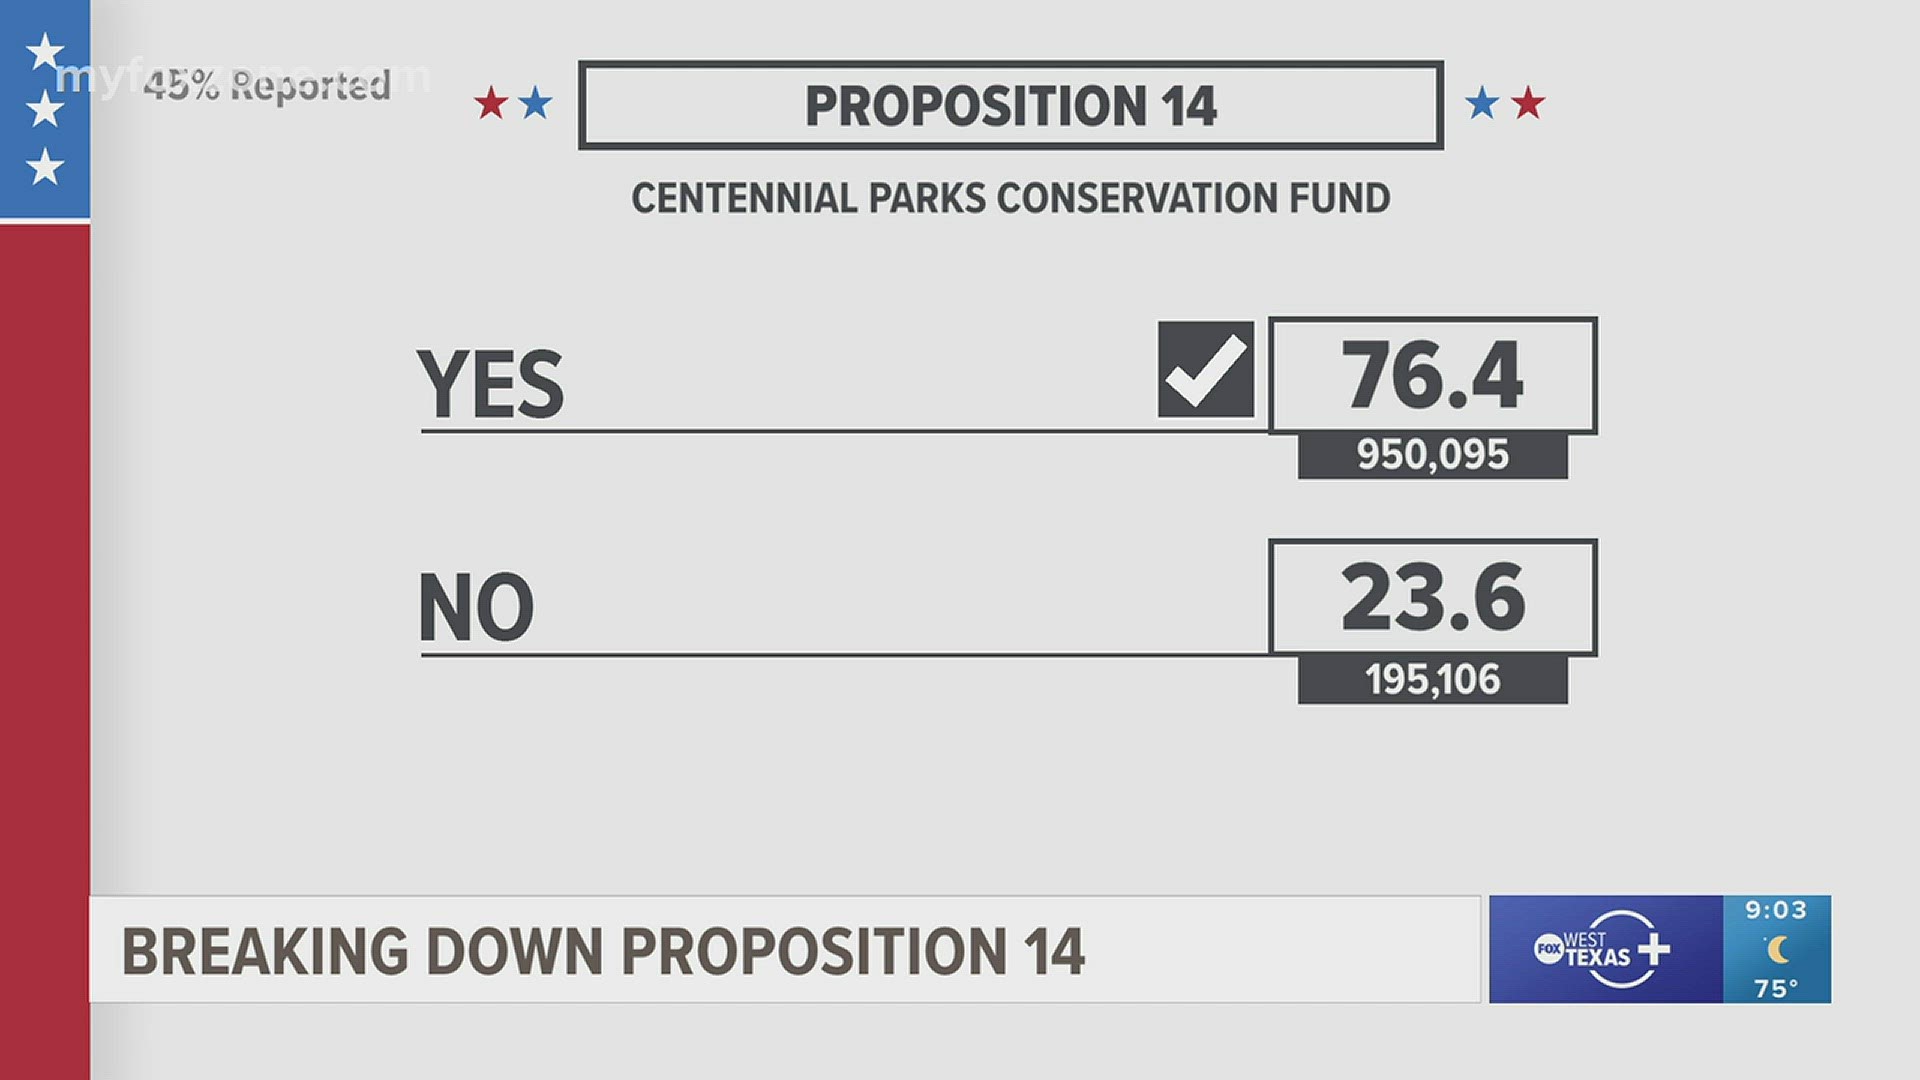 Prop 14 was one of the 14 amendments that Texans could vote on, Tuesday's election.